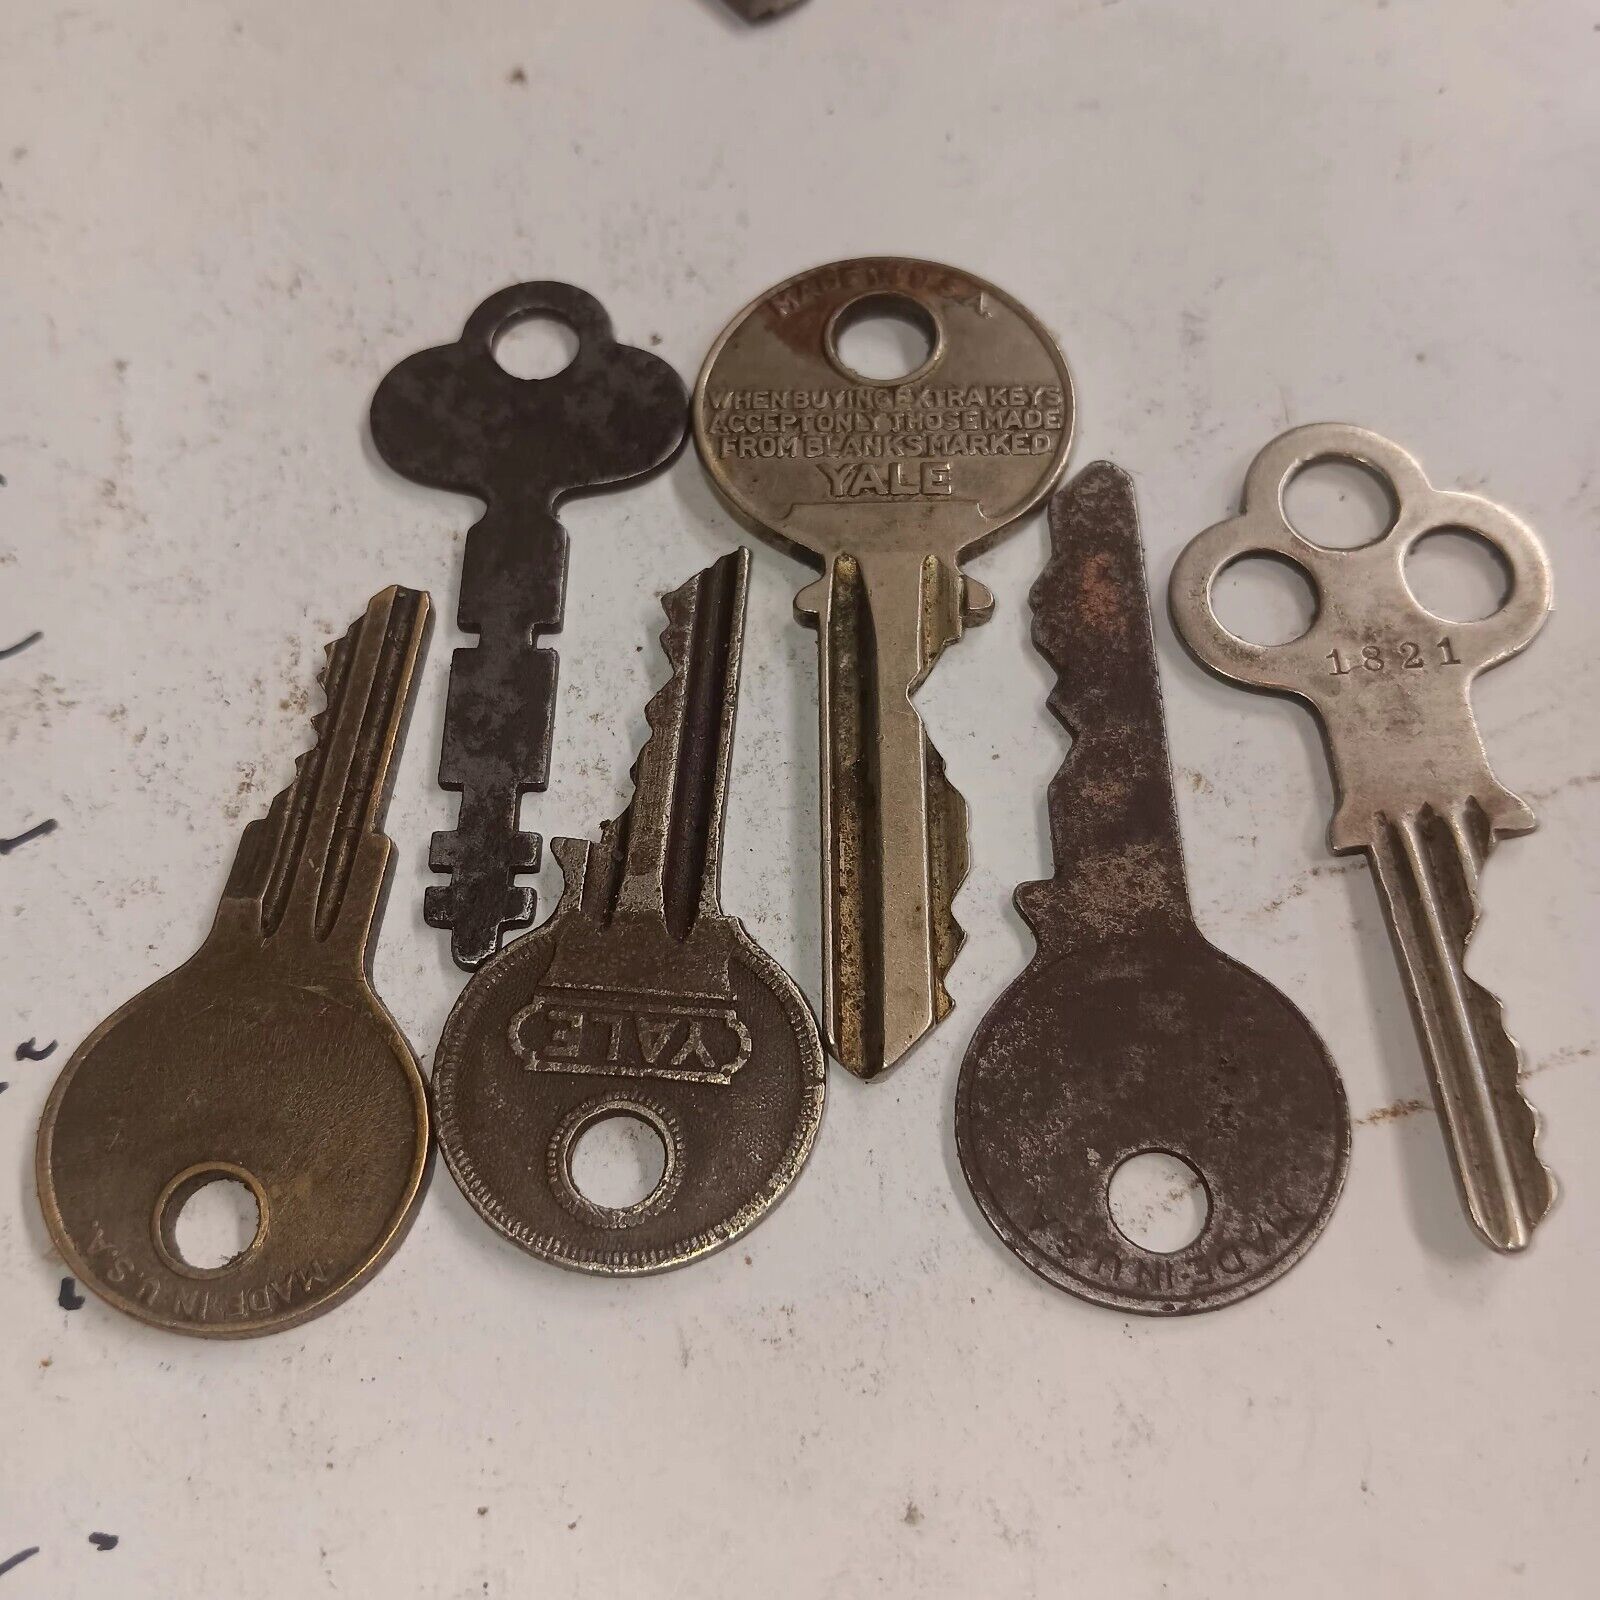 6 Antique And Vintage Yale Keys Of Different Years And Era's.  Nice Set Of Keys